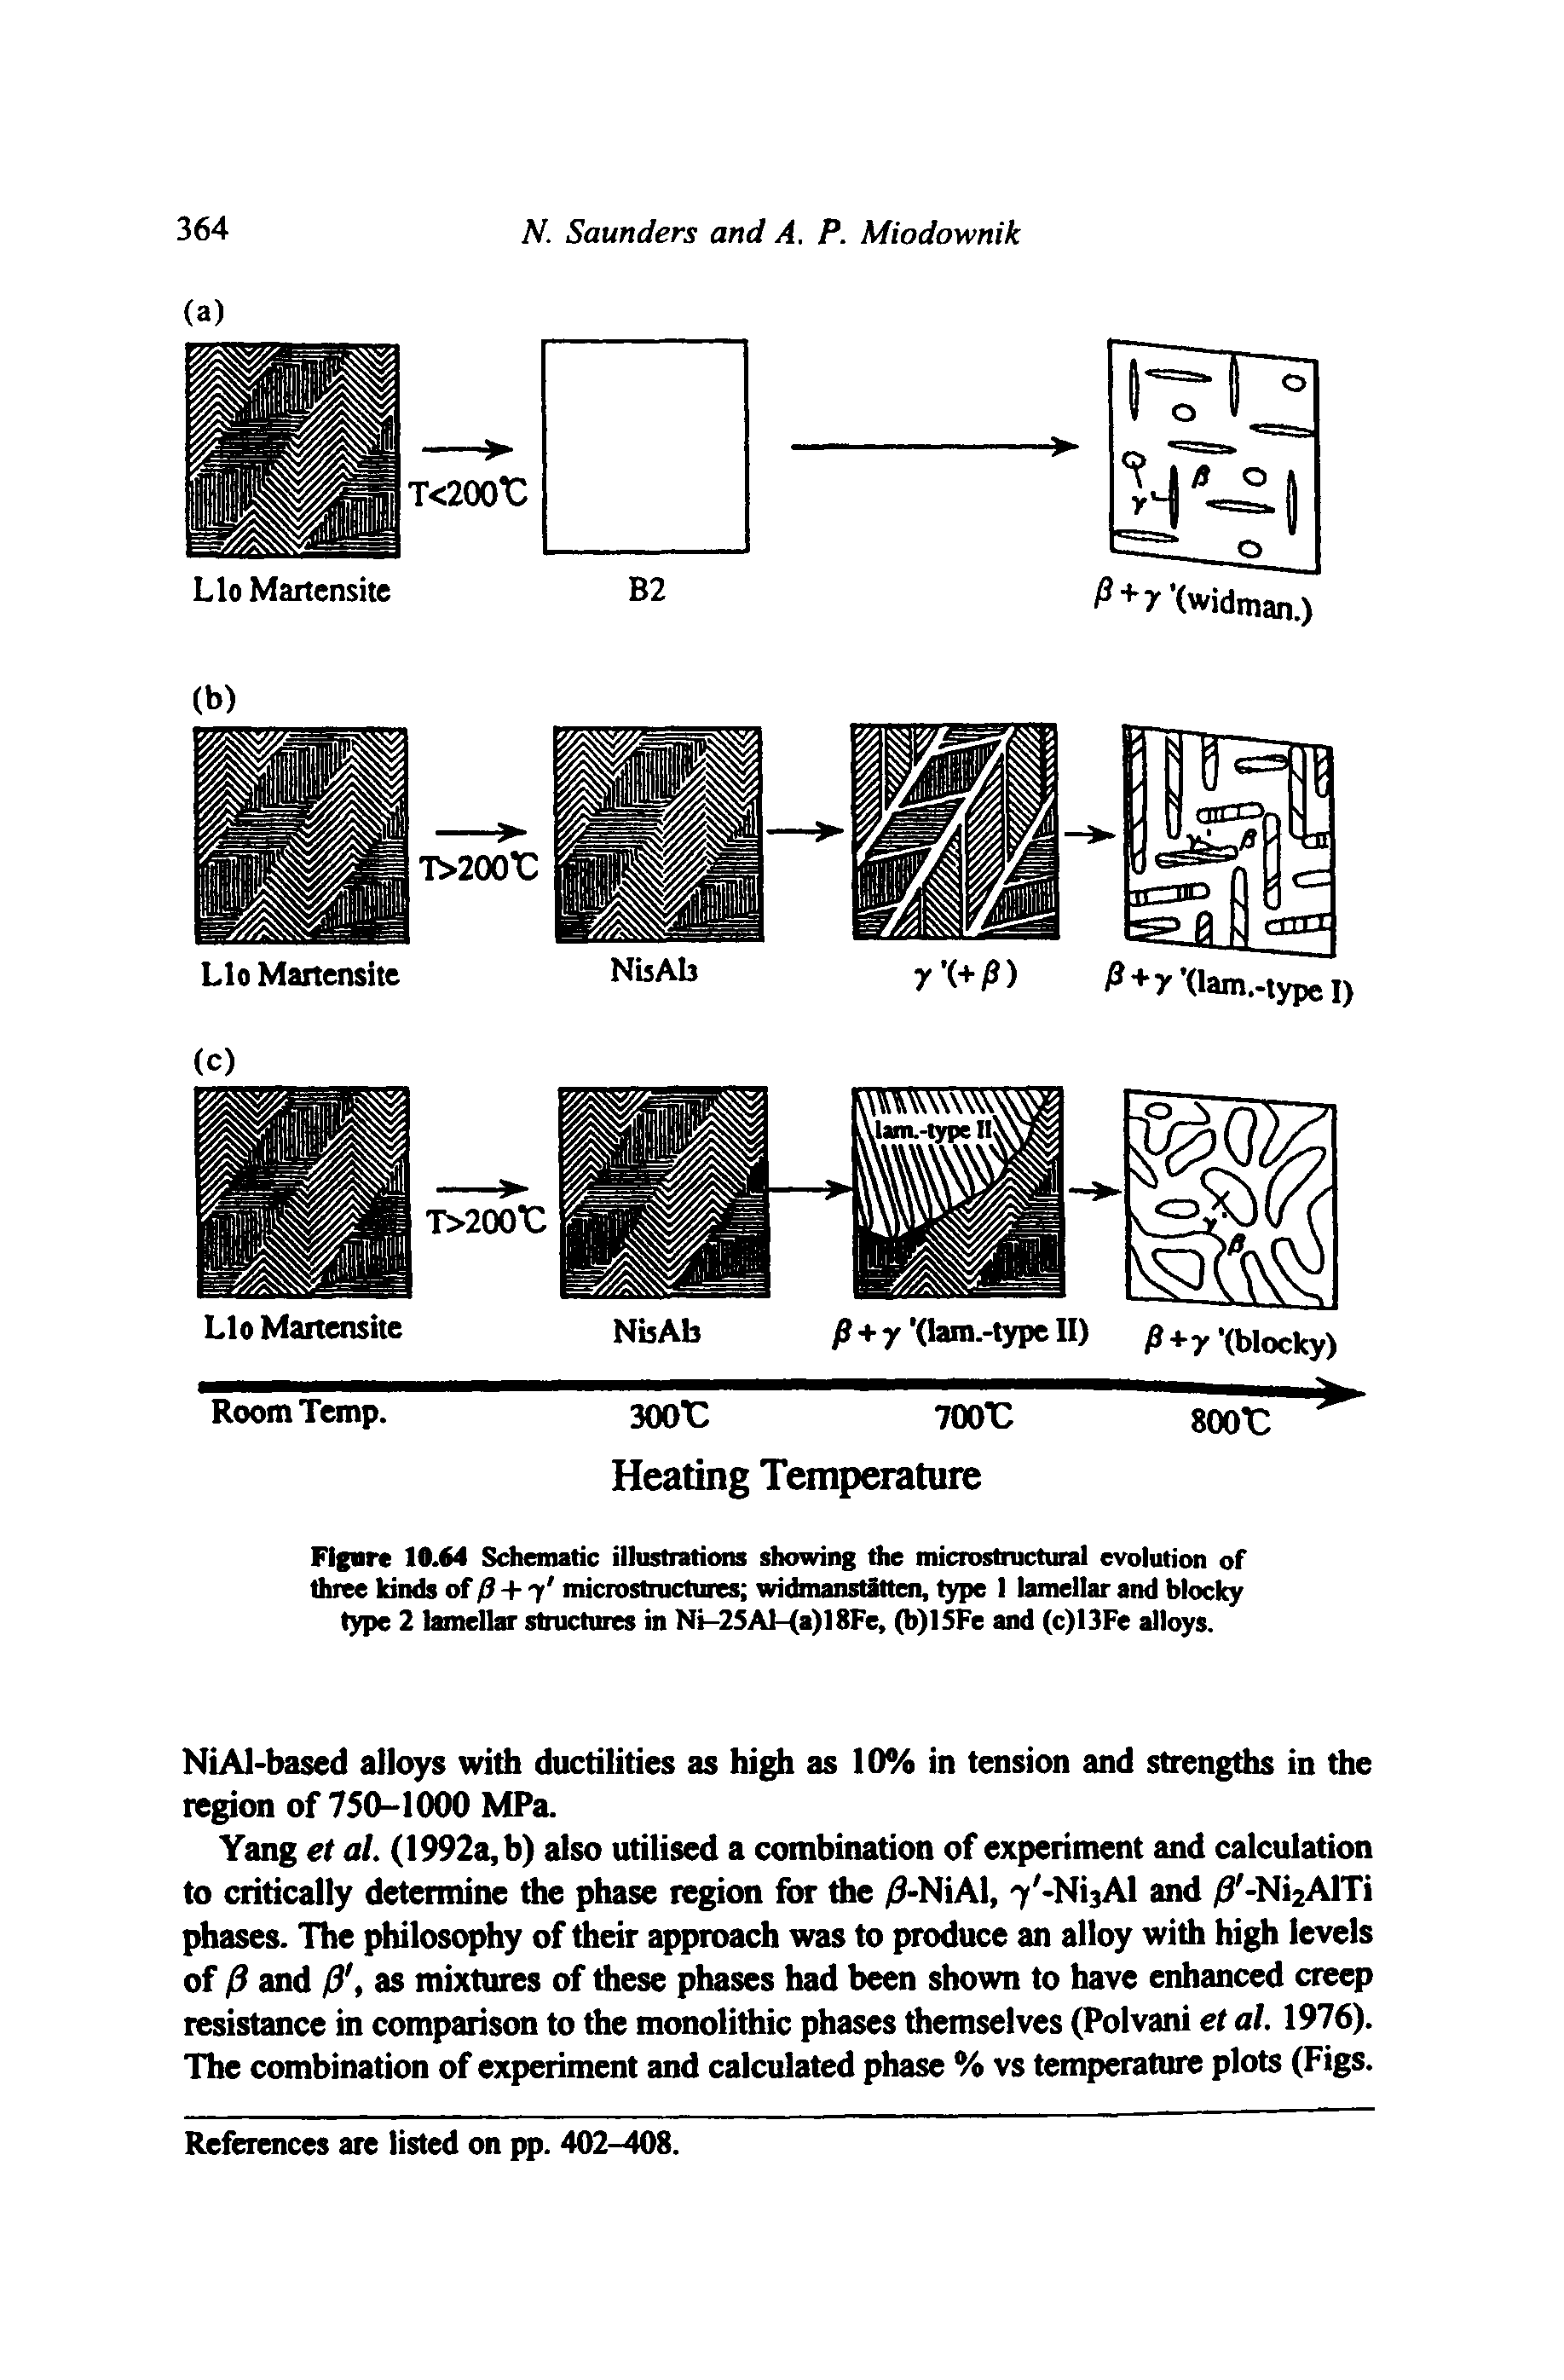 Figure 10.64 Schematic illustrations showing die microstructural evolution of three kinds of + 7 microstiuctures widmanstitten, type I lamellar and blocky type 2 lamellar stnictures in Ni-2SAl-(>)t8Fe, (b)lSFe and (c)13Fe alloys.